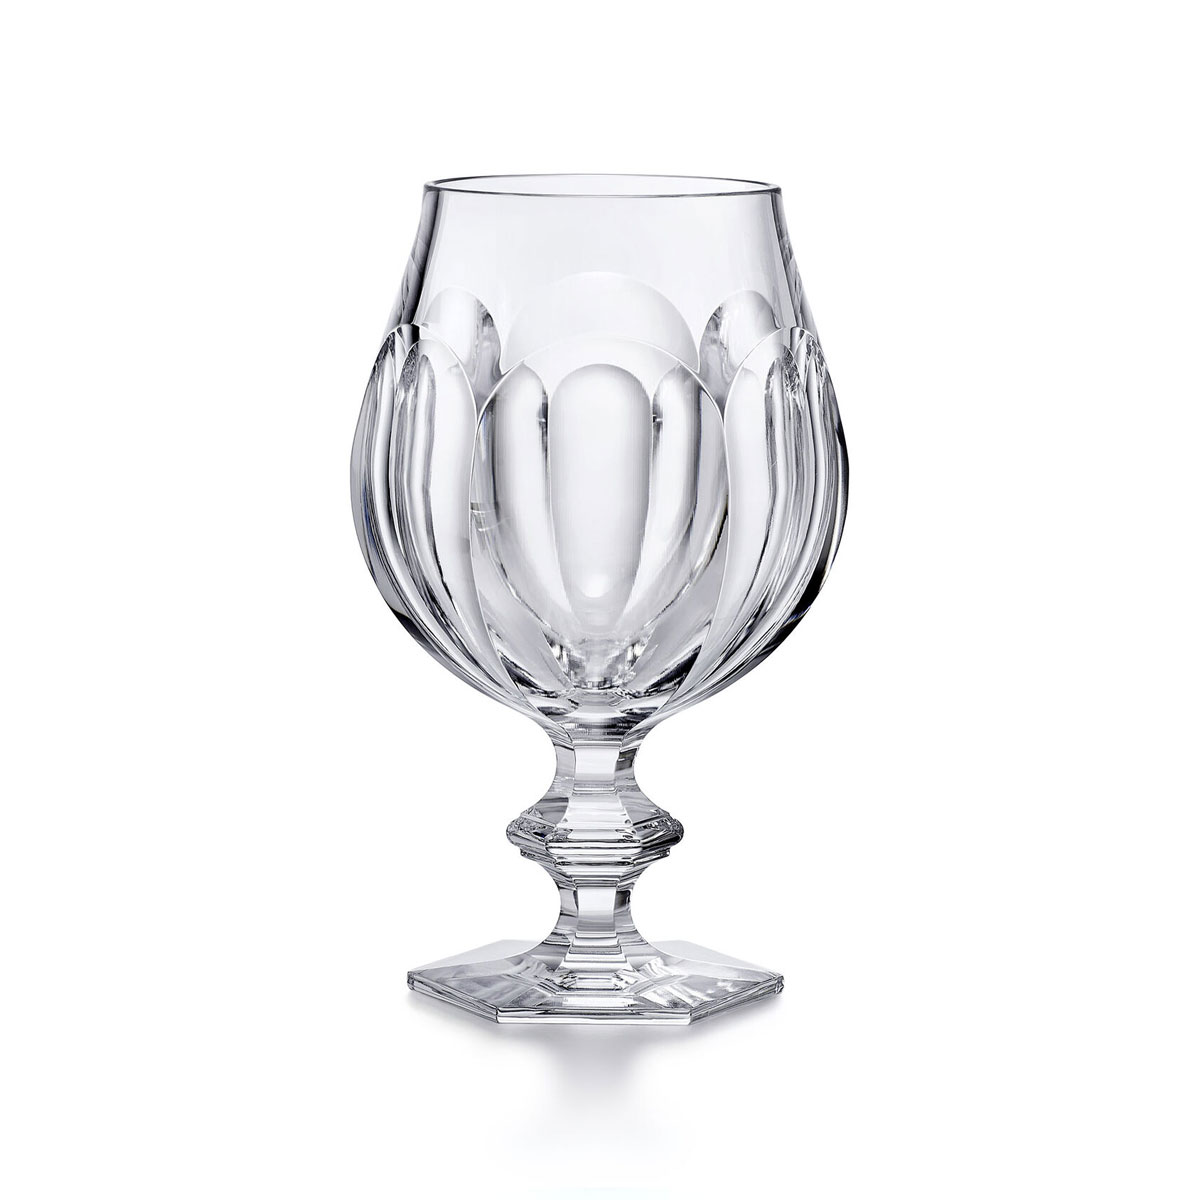 Baccarat Crystal Harcourt Proost Beer Glass, Single